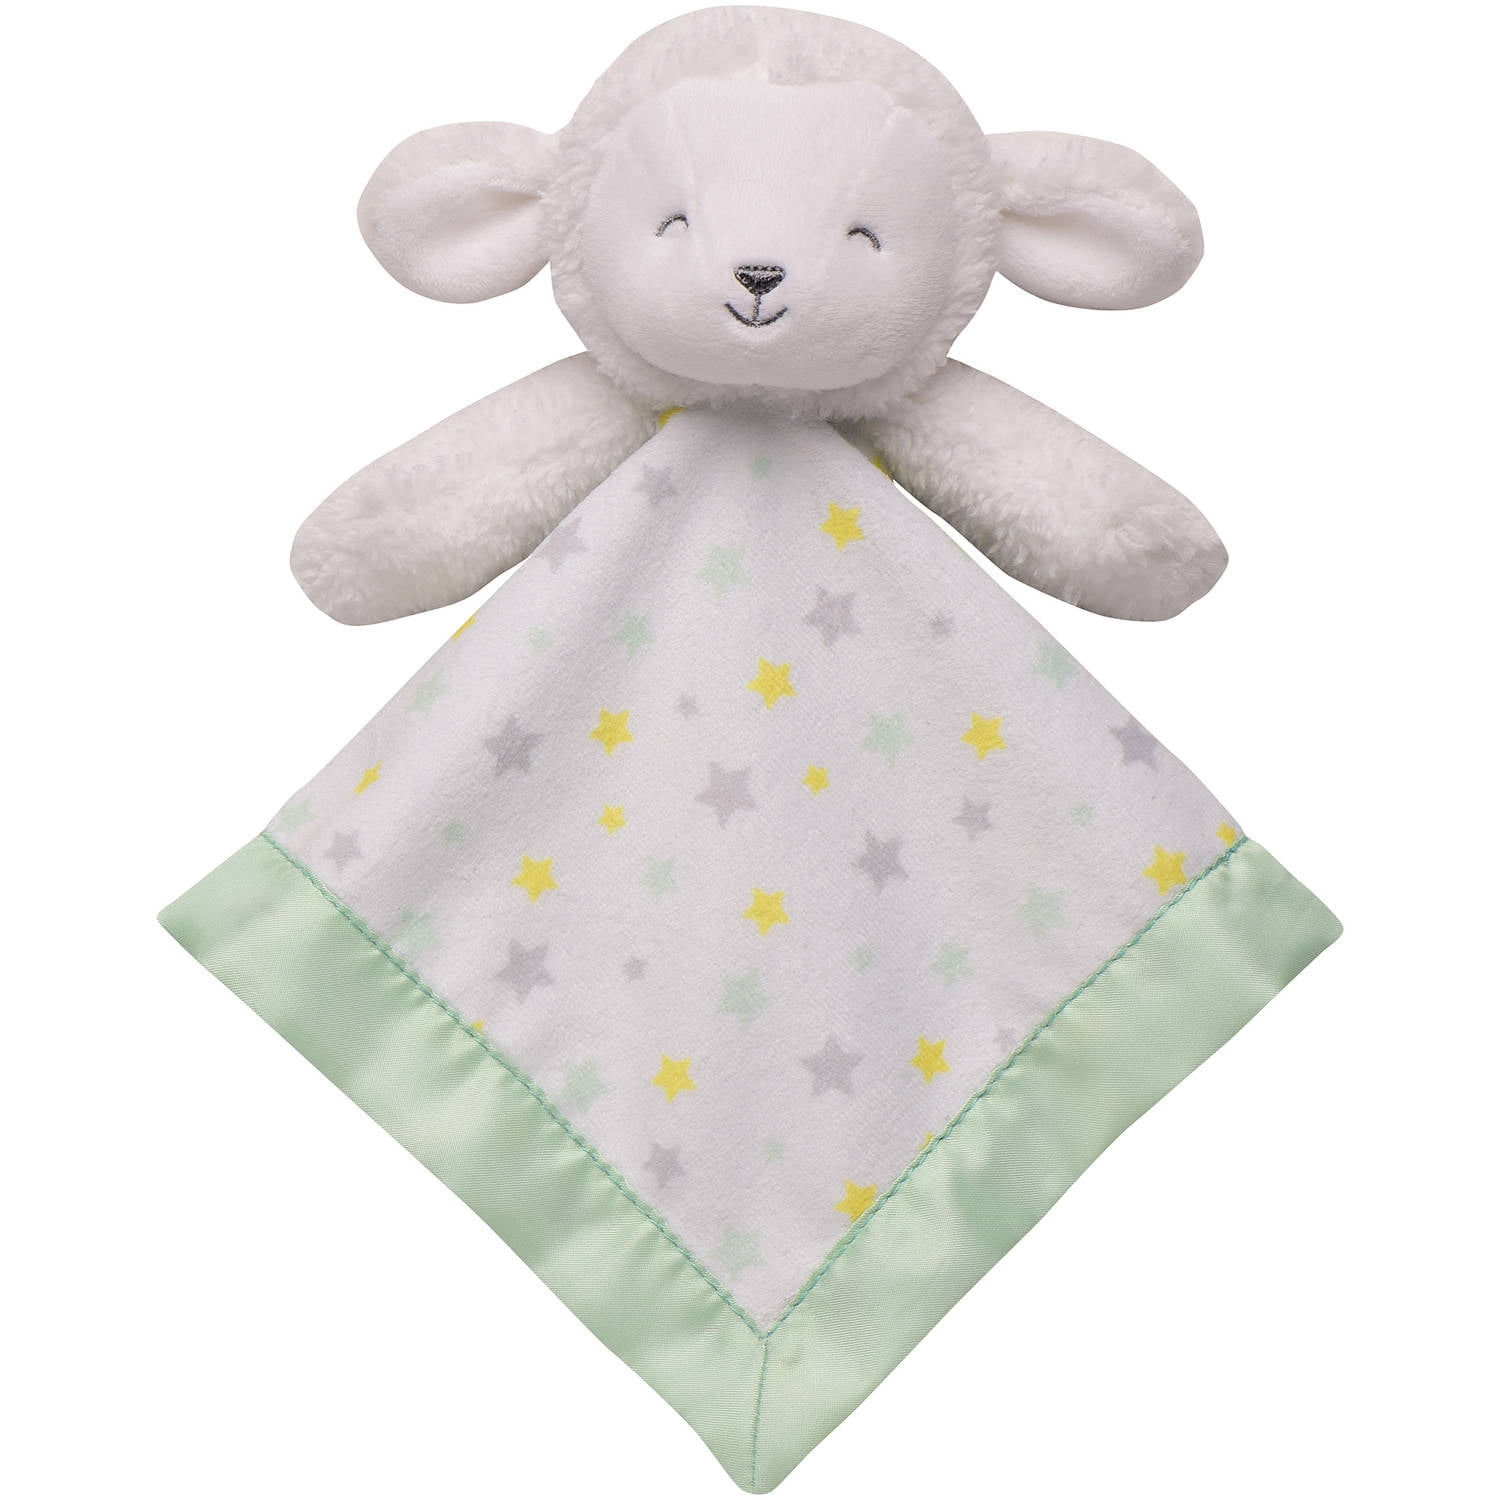 NWT Carters Just One You Grey And White Lamb Sheep Fleece Baby Blanket Rattle 